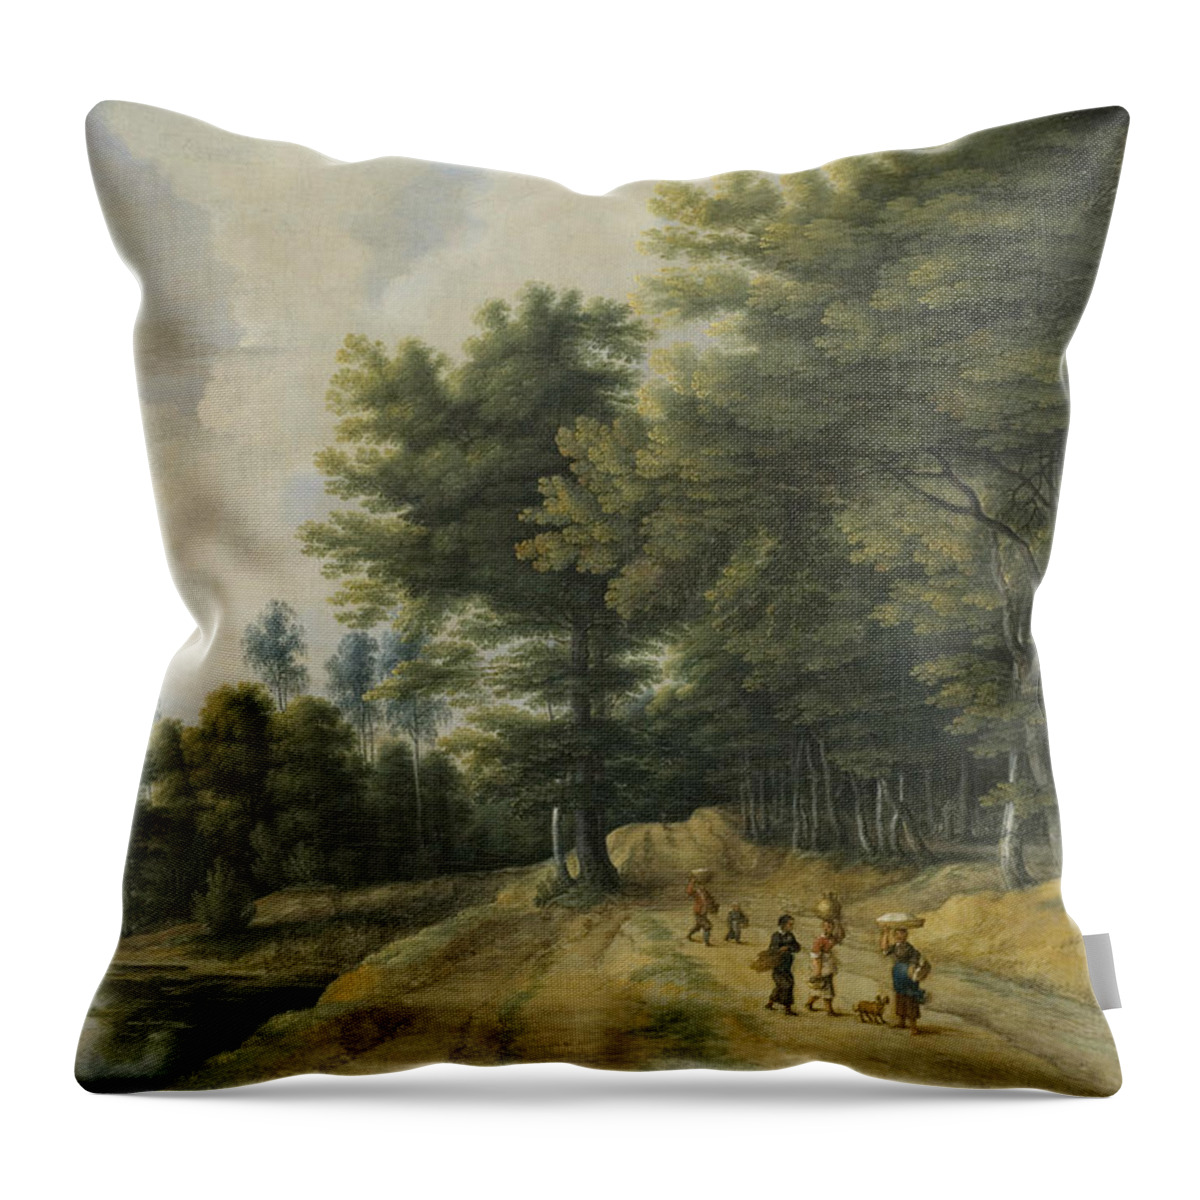 17th Century Art Throw Pillow featuring the painting Landscape with a Road through a Wood of Beeches by Lucas van Uden